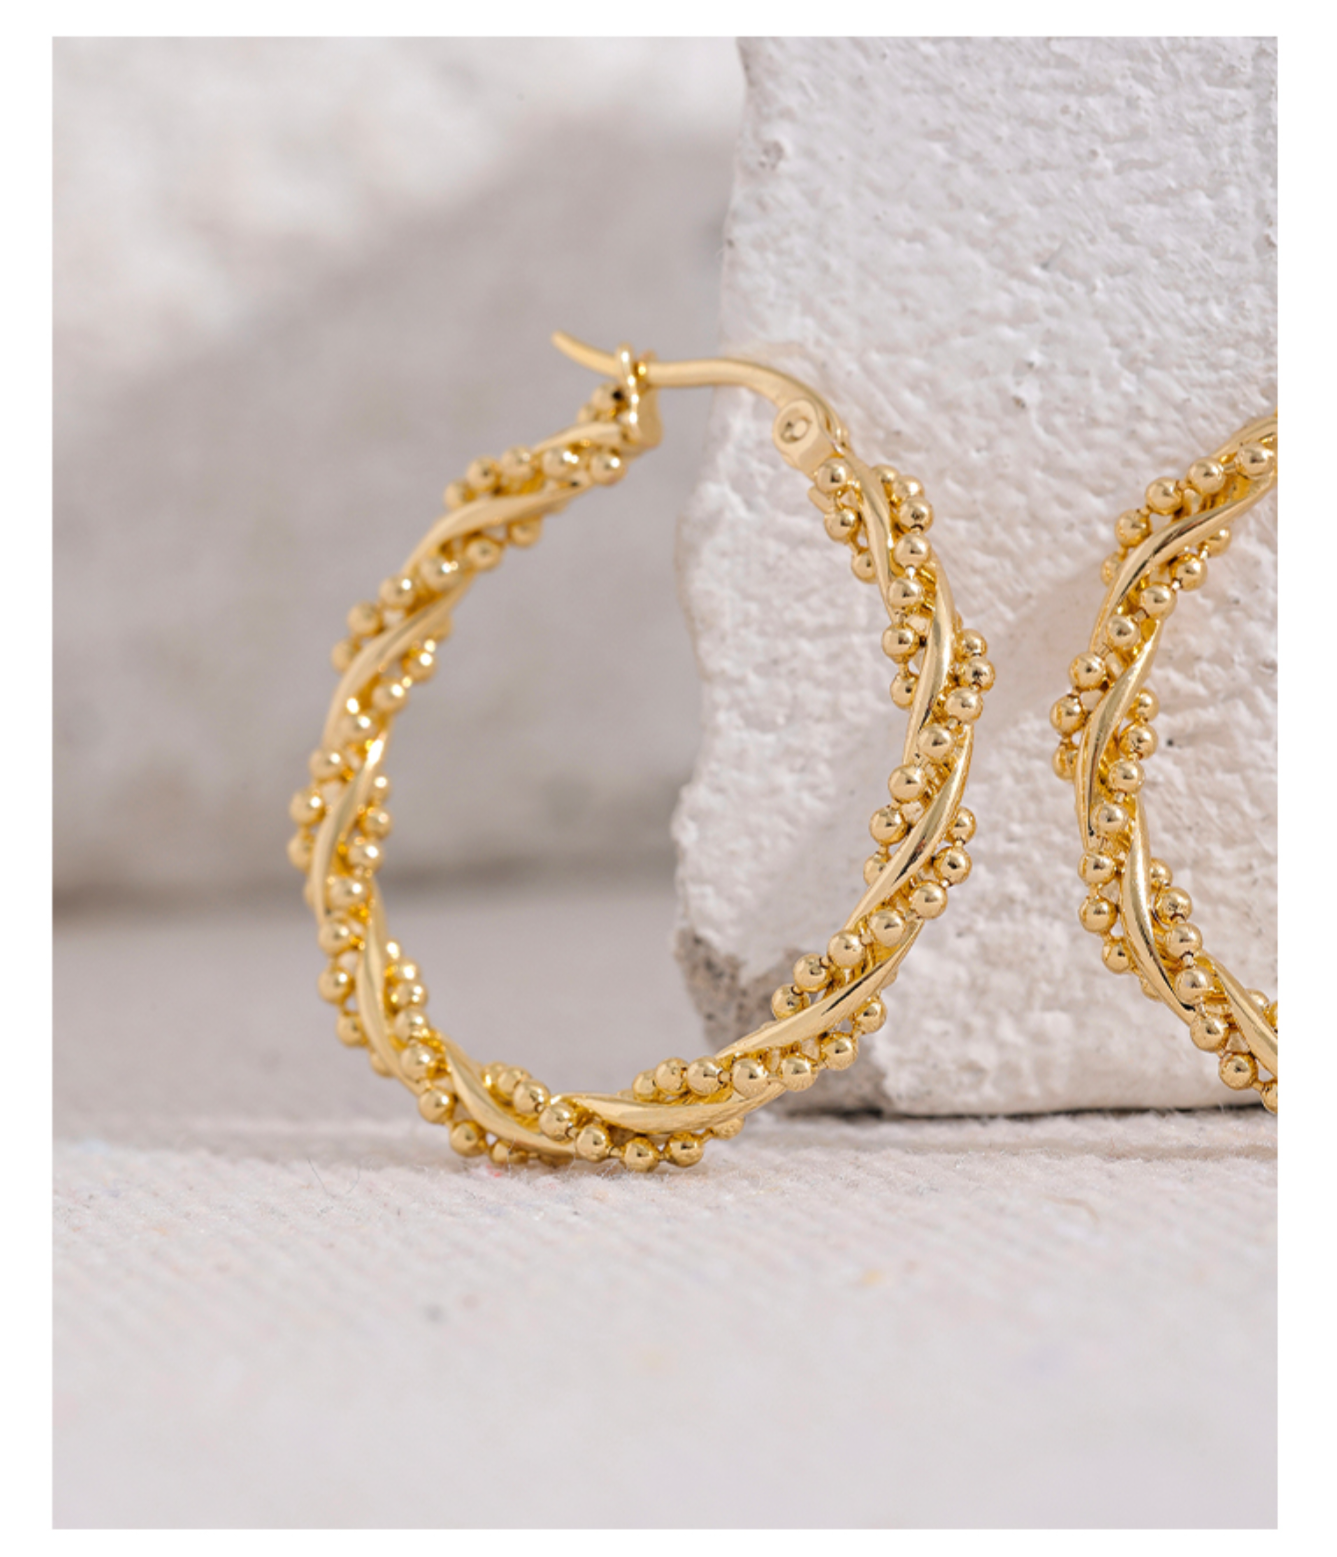 GIA - New Style Twist Beads Hoops Earrings - Golden Collection